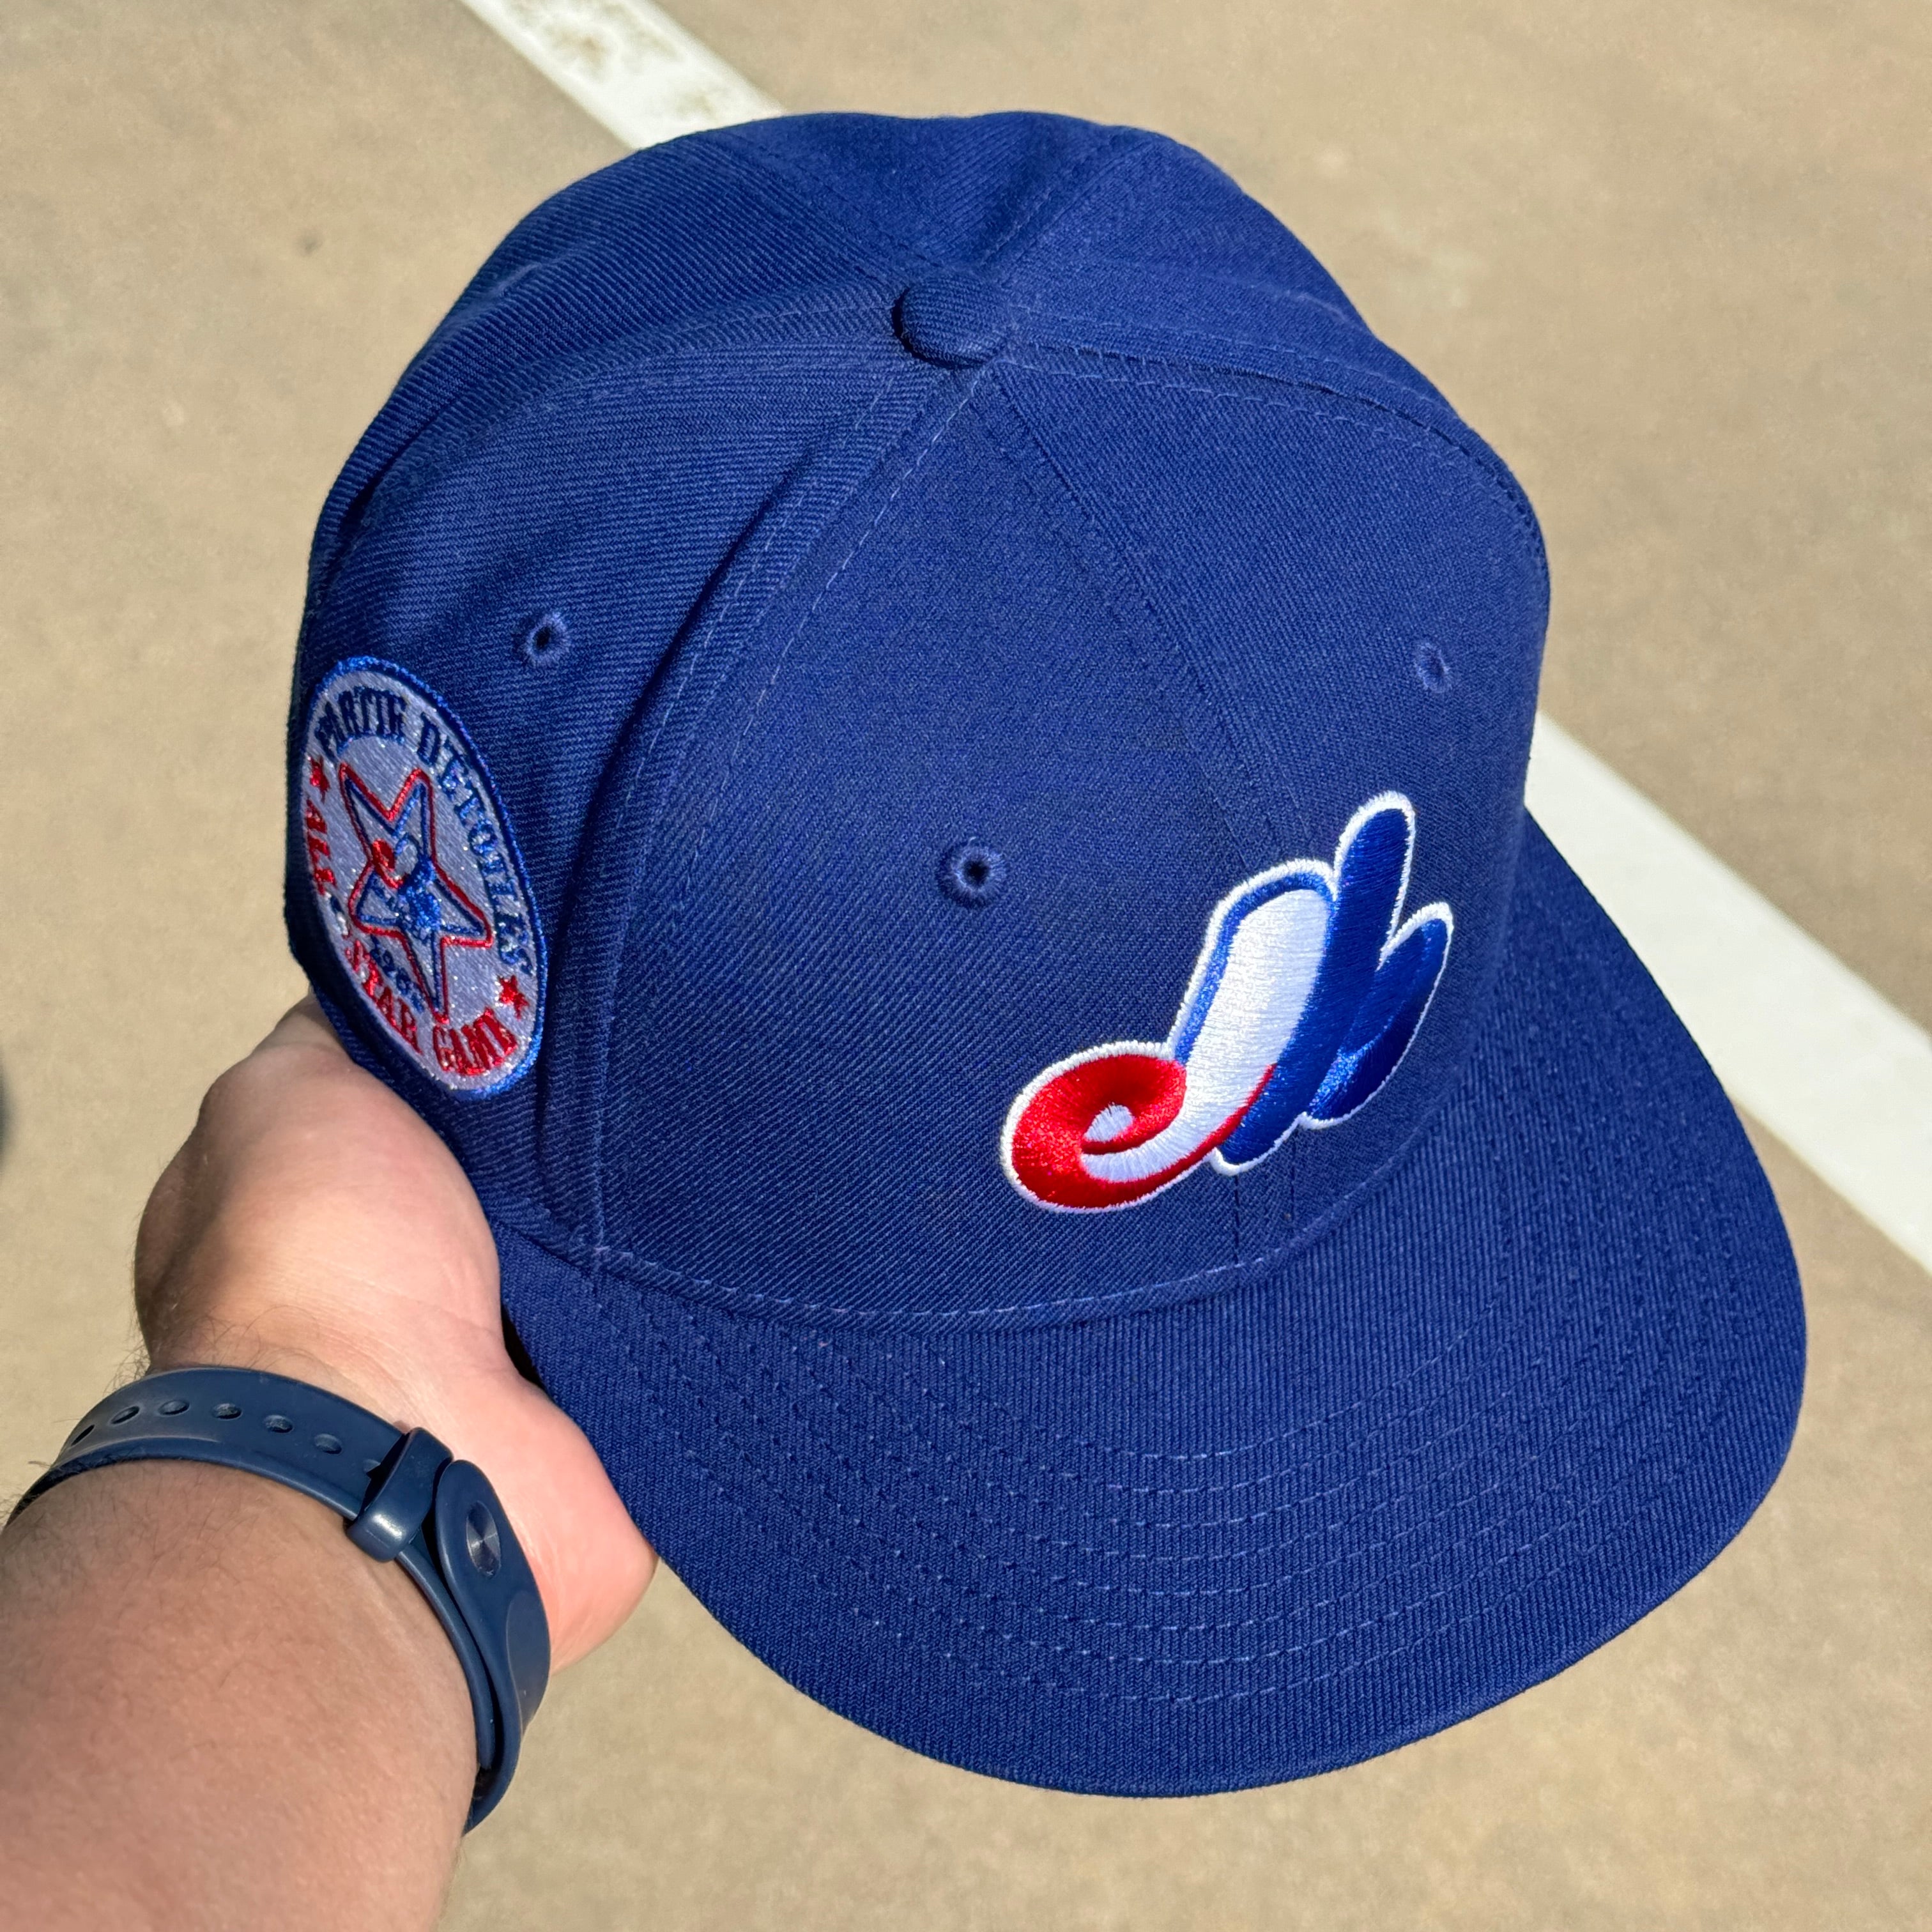 USED 1/8 Blue Montreal Toronto Expos 1982 All Star Game 59fifty New Era Fitted Hat Cap